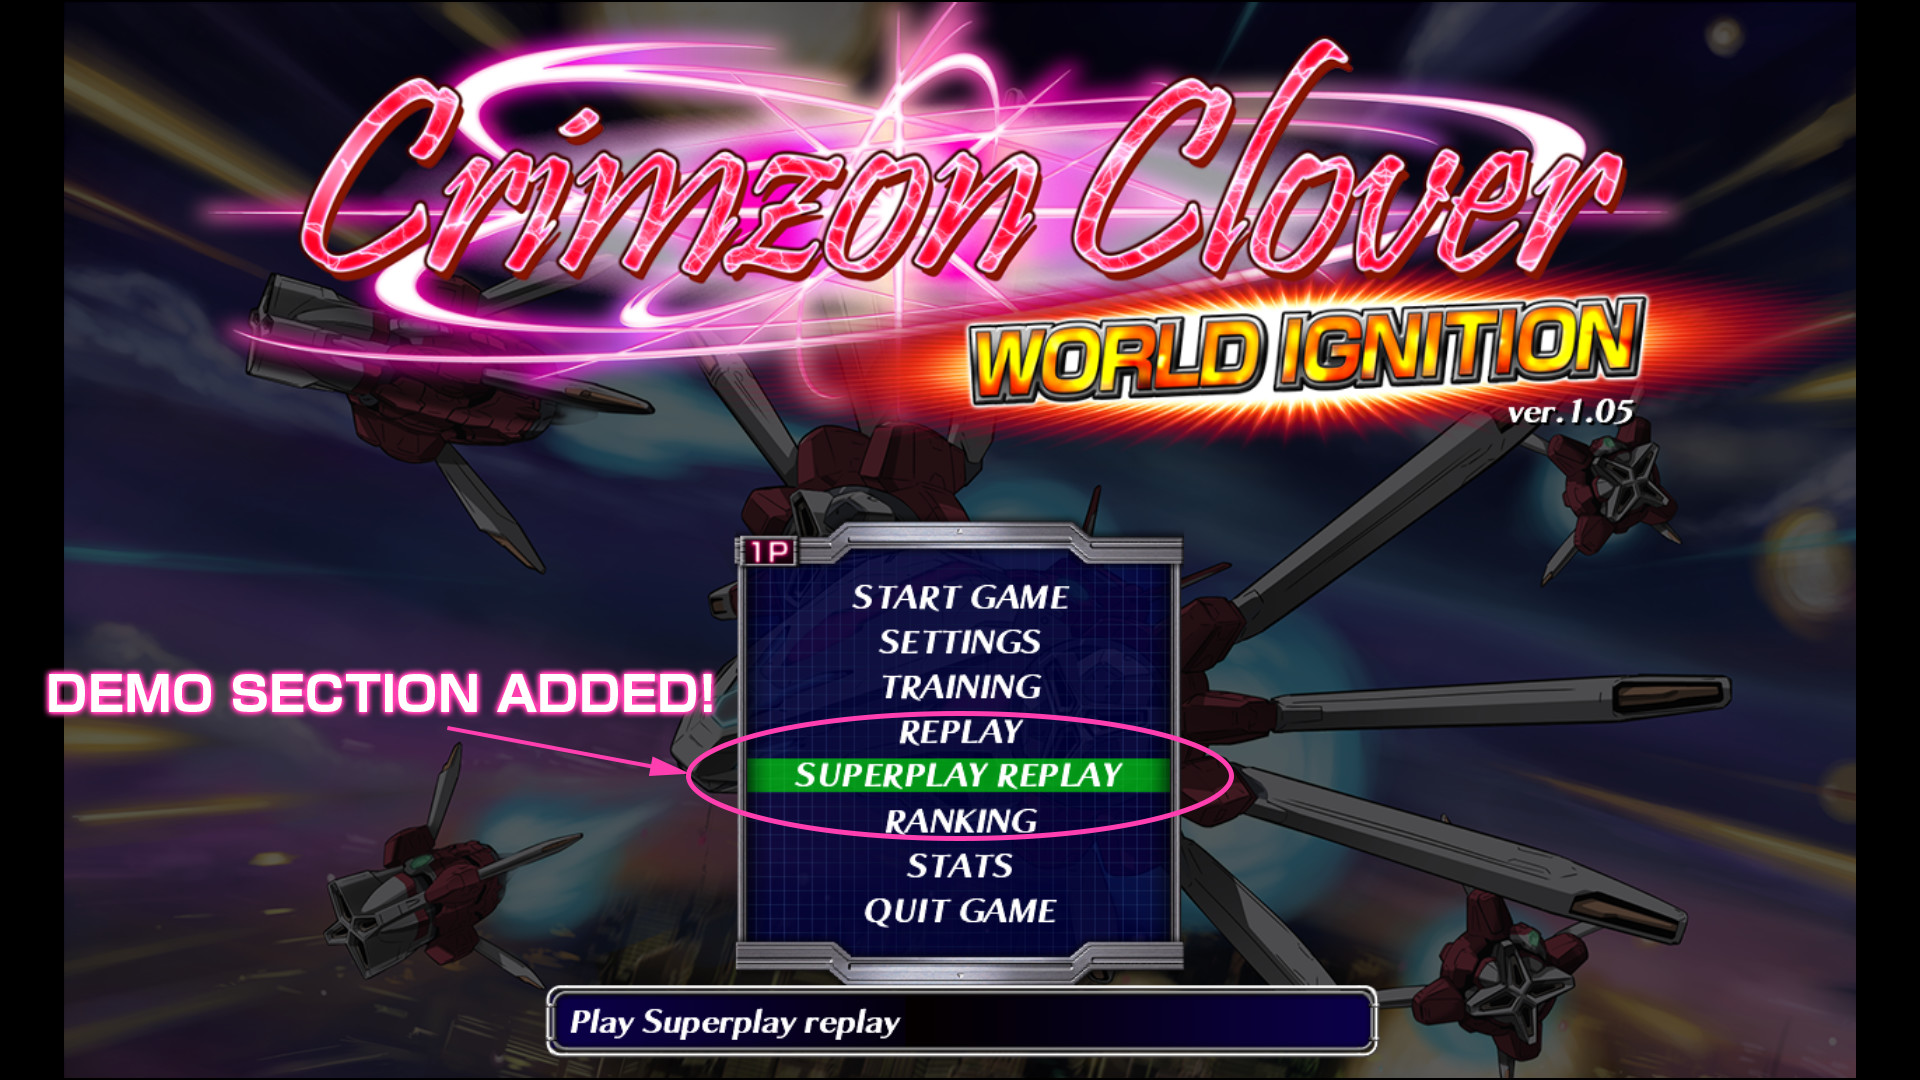 Crimzon Clover WORLD IGNITION - Superplay Strategy Guide Featured Screenshot #1